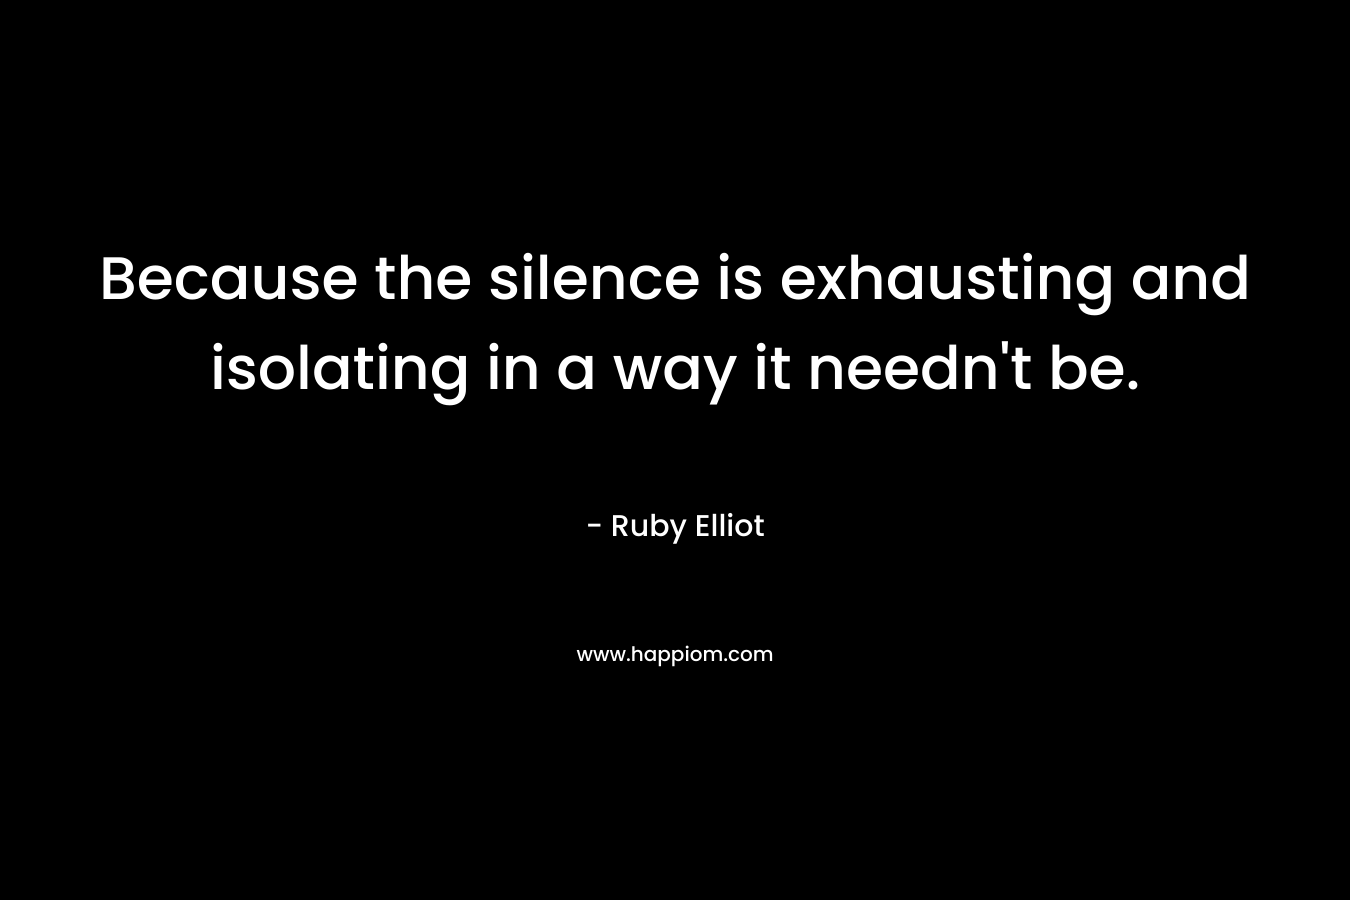 Because the silence is exhausting and isolating in a way it needn’t be. – Ruby Elliot